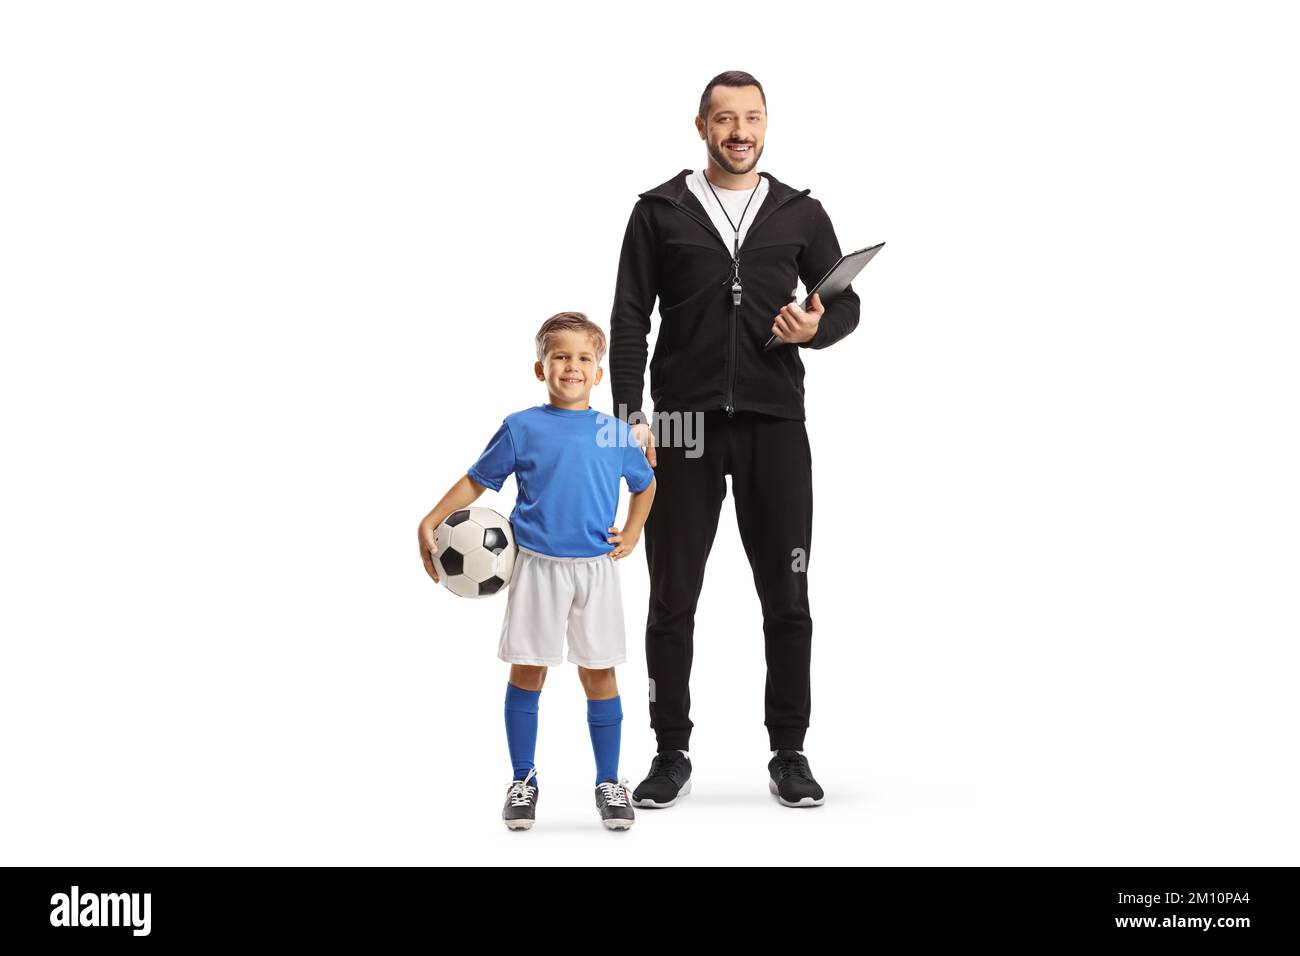 Football coach with a whistle holding a clipboard and a boy standing next to him isolated on white background Stock Photo